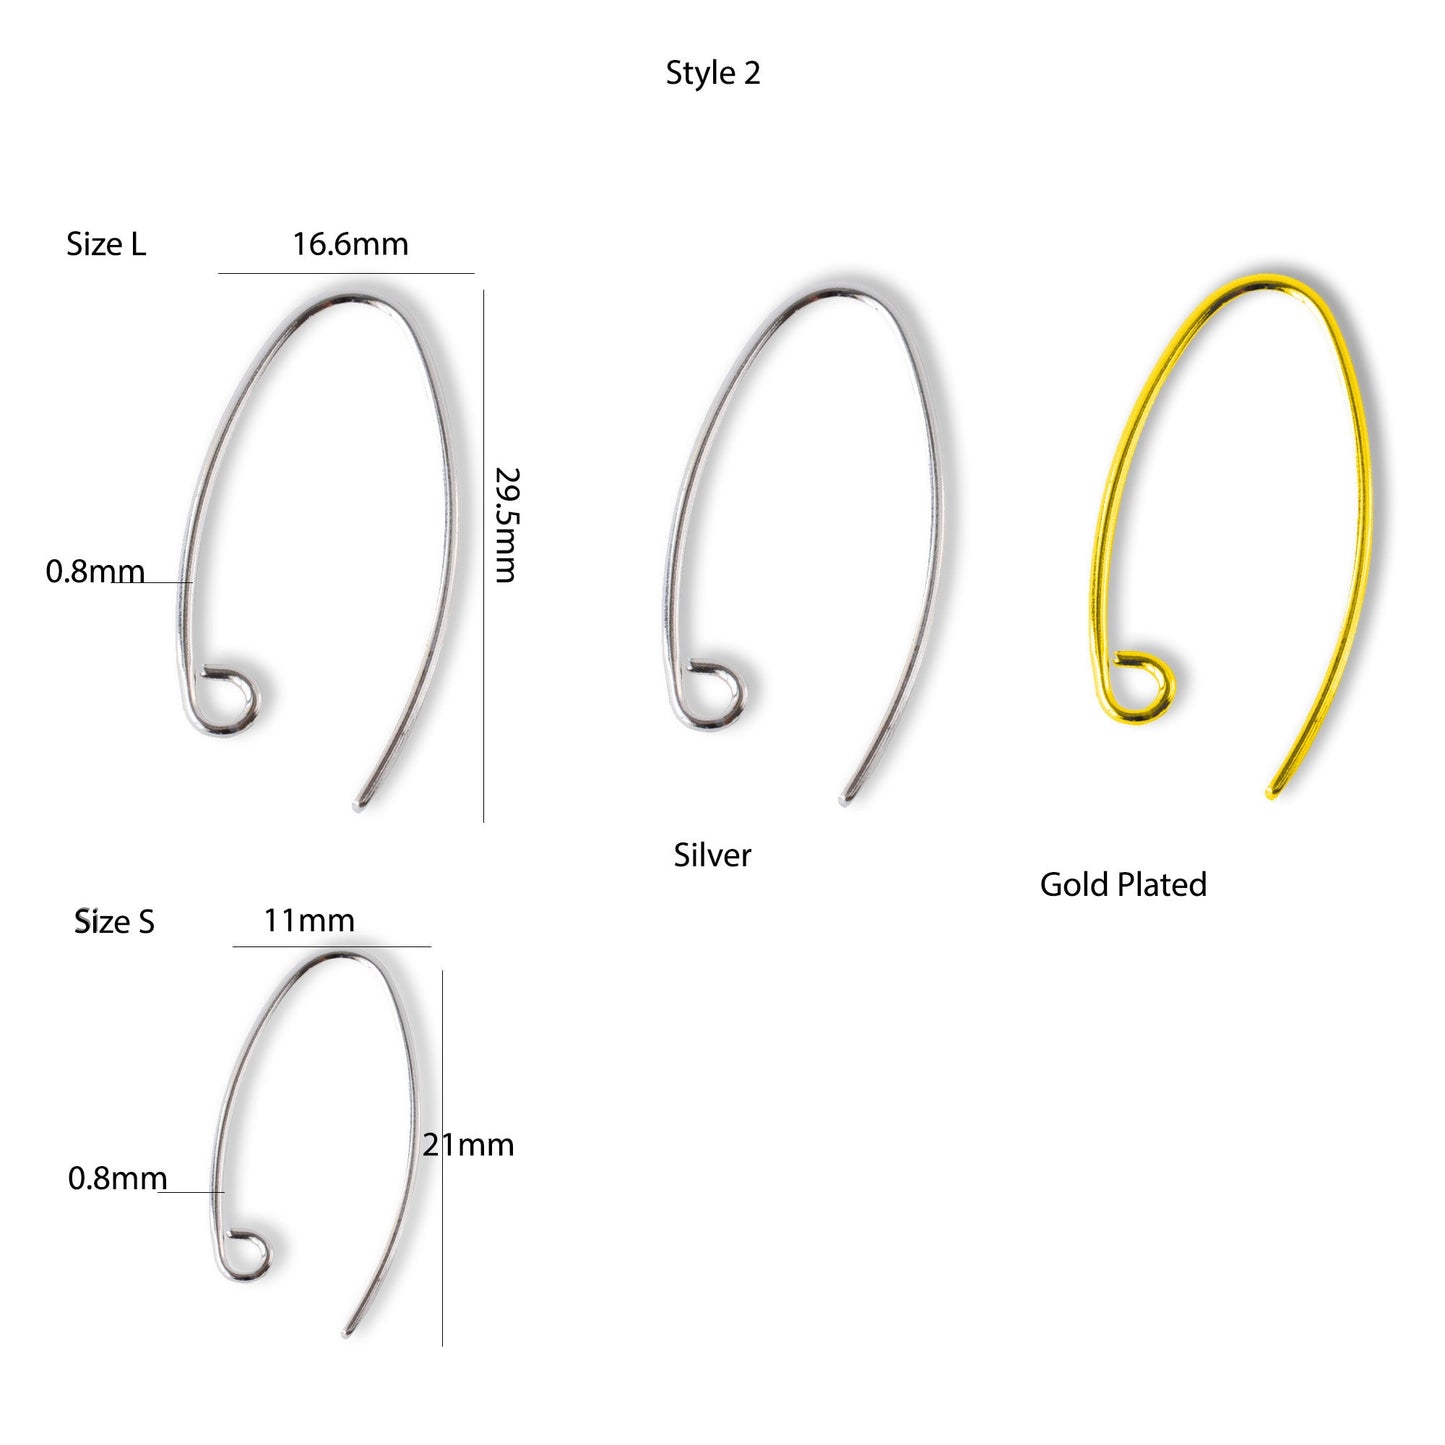 Ear Wires, Earring Hooks for Jewelry Making - Sterling Silver - Hypoallergenic Large Hooks With Bead Caps, Stopper Bead and Other 5 style